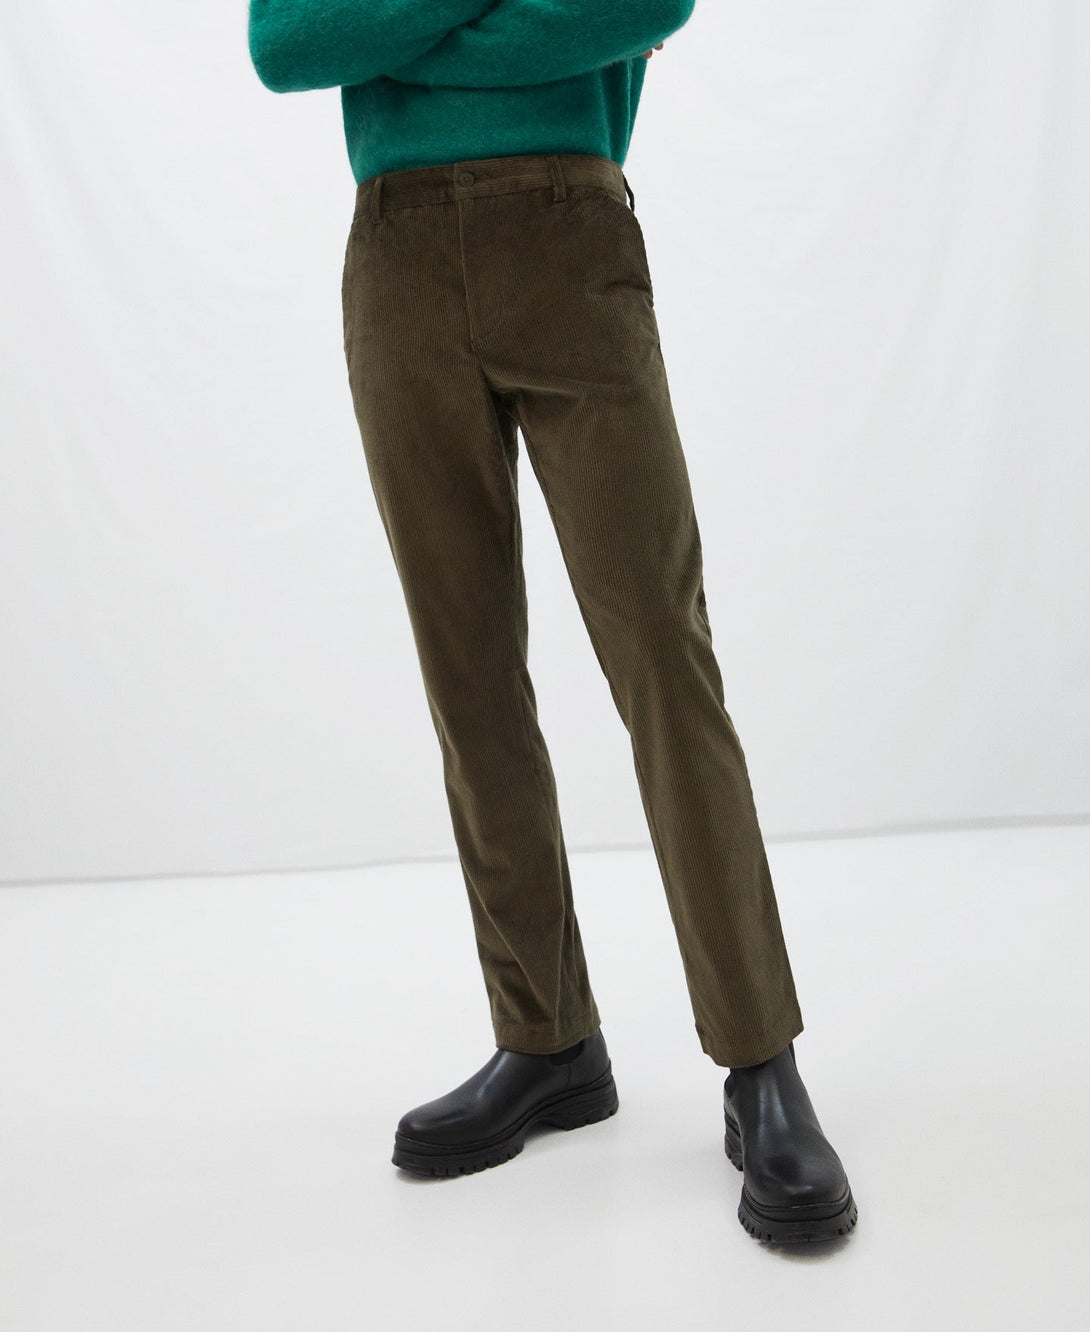 Men Trousers | Green Corduroy Chino Trousers by Spanish designer Adolfo Dominguez